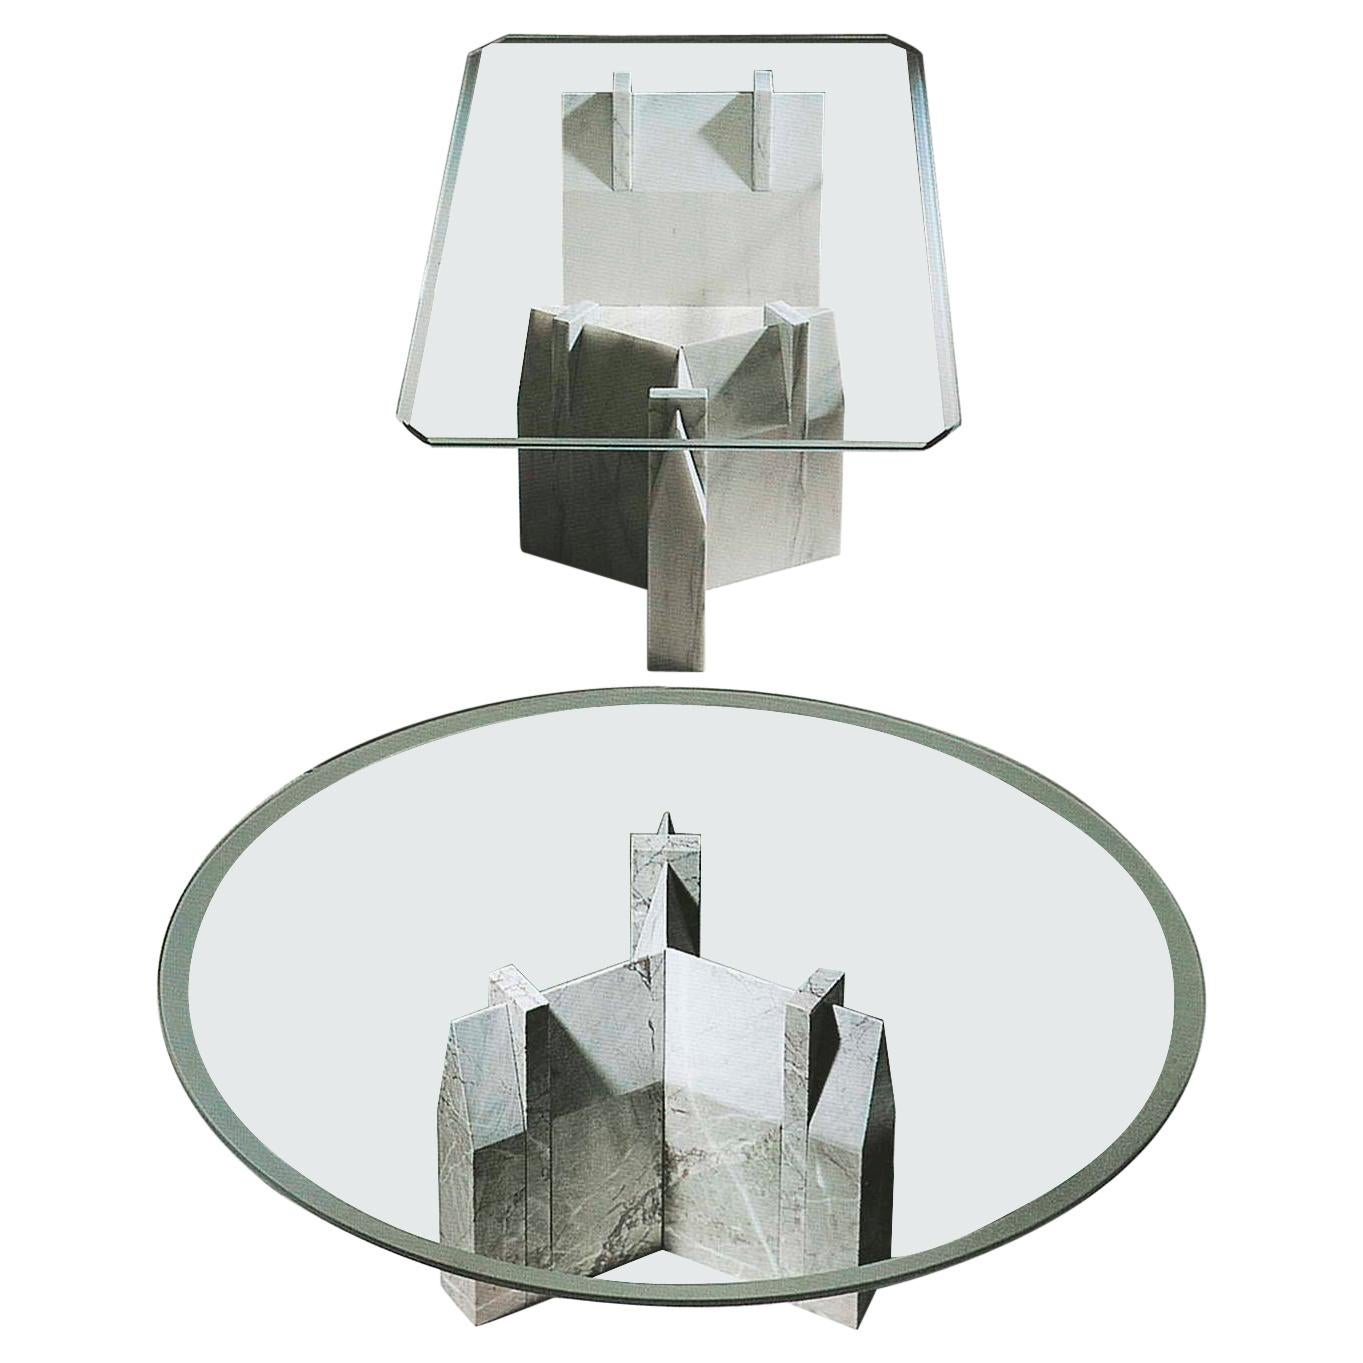 21st Century by Arch. A. Natalini "ANSEATICO" Rectangular or Round Coffee Table